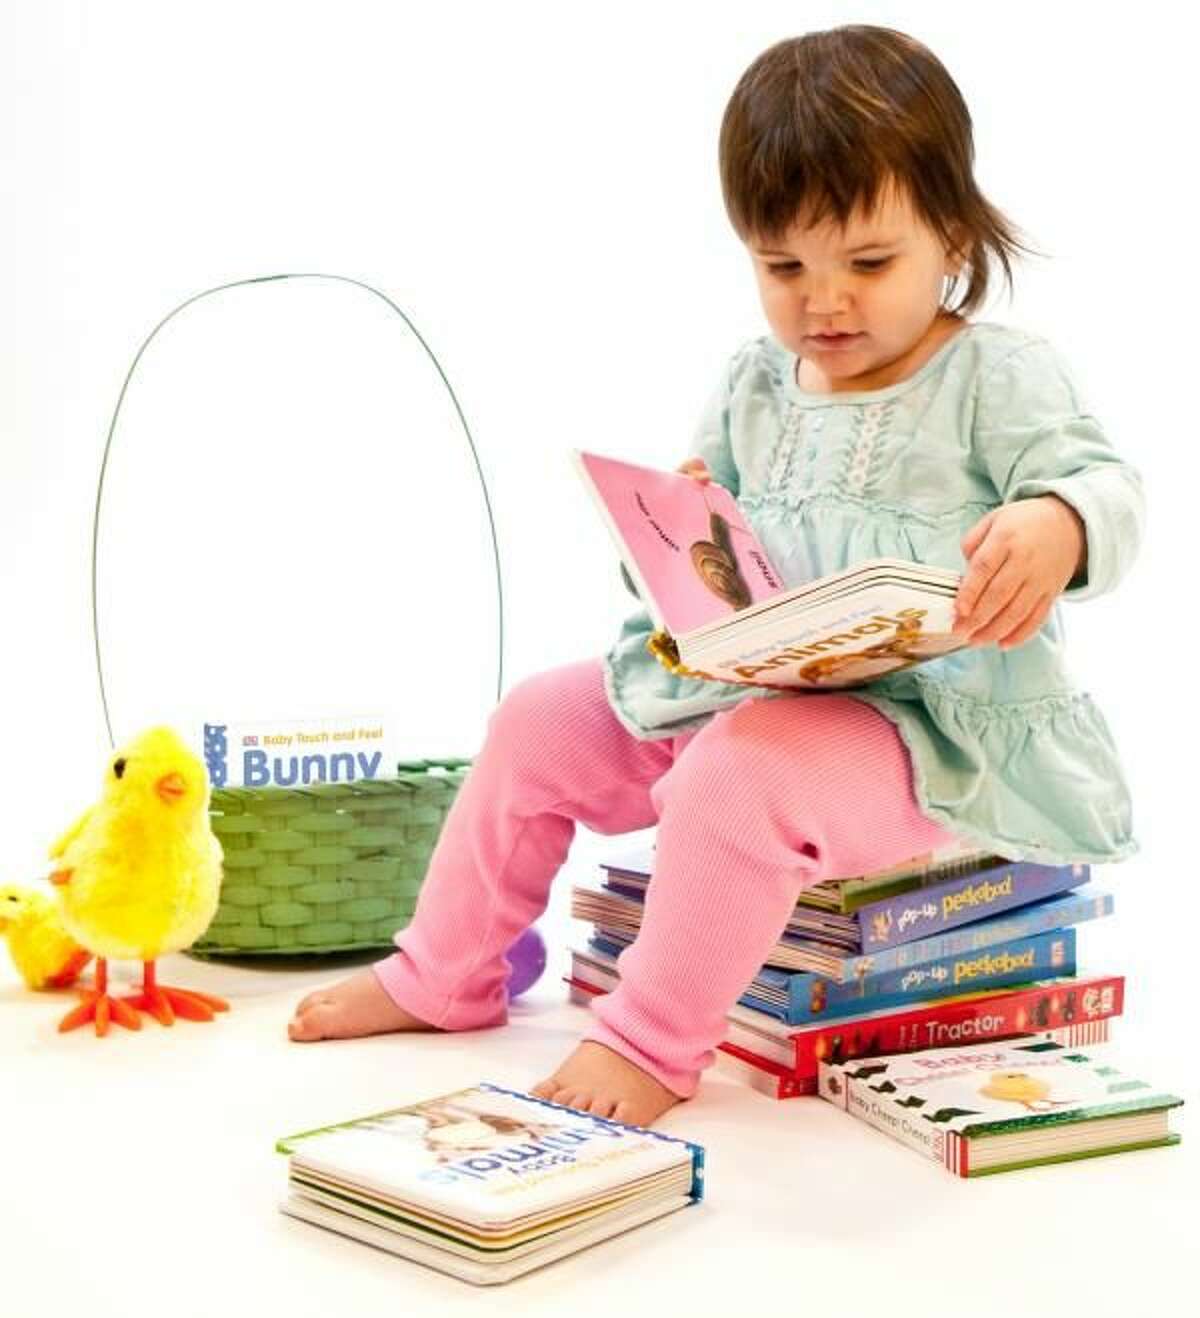 Books Make Great Easter Gifts for Kids